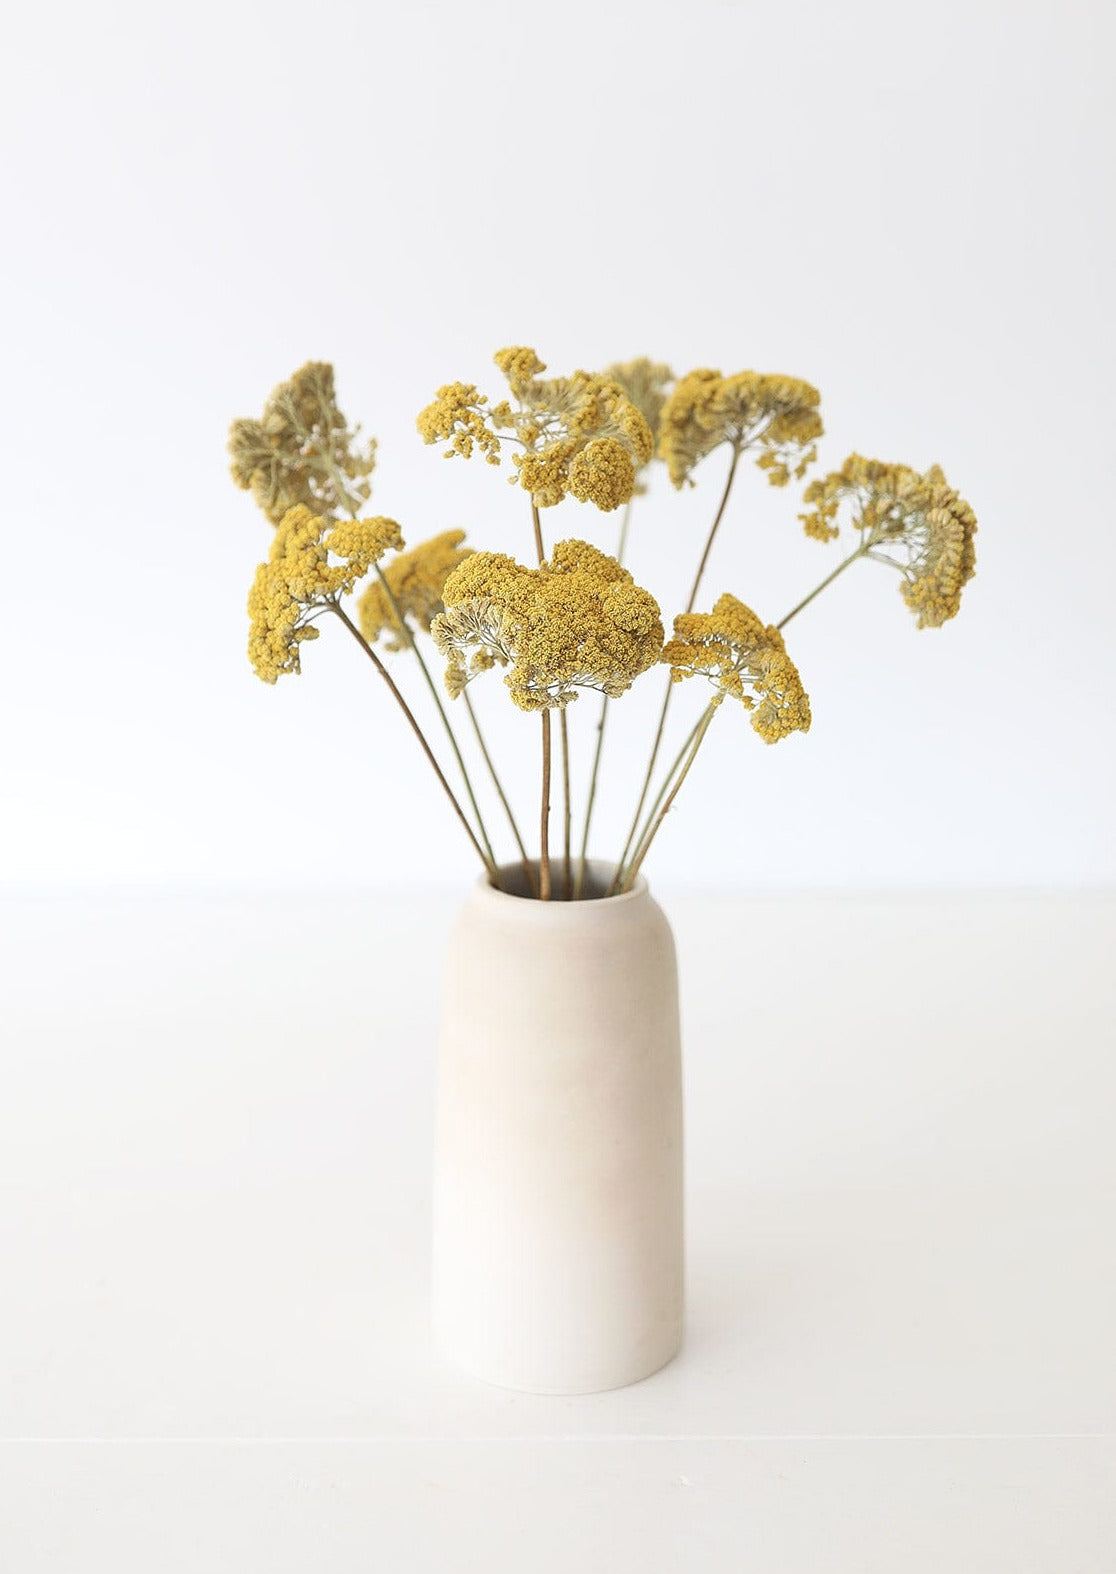 Dried Yellow Yarrow Flower Stems in Vase at Afloral